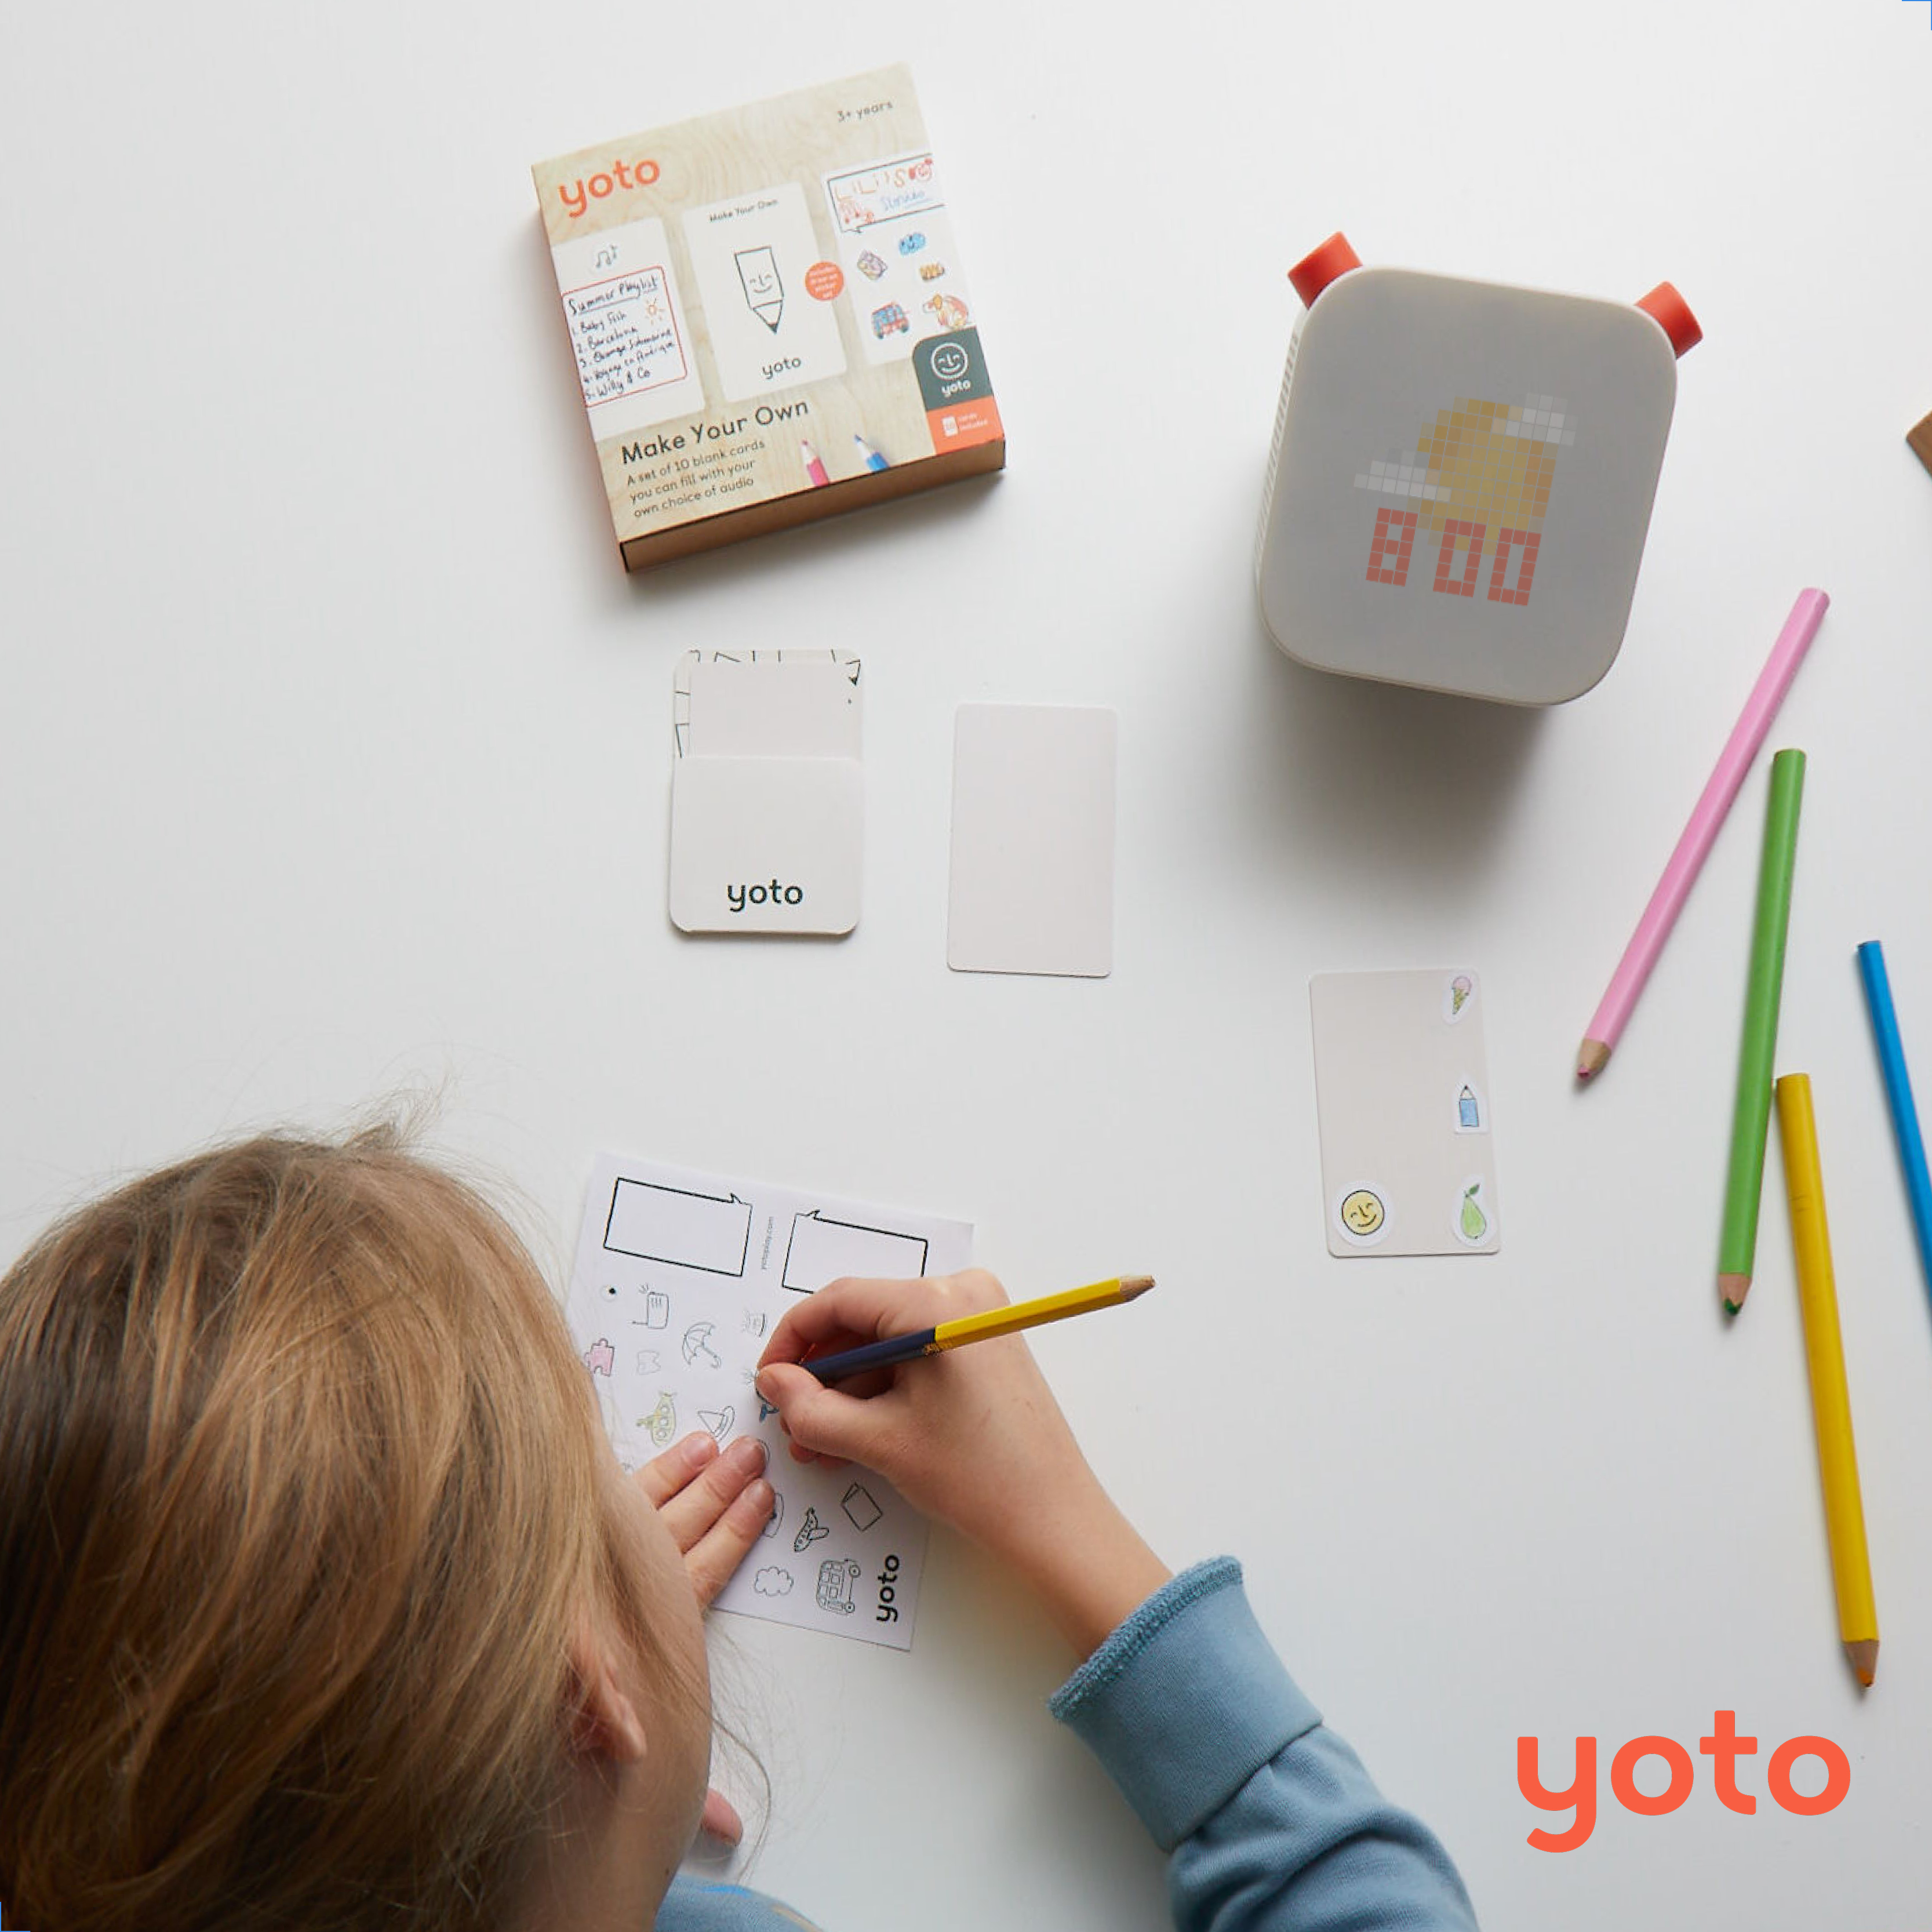 How to create a Make Your Own Yoto card (and how we use it with